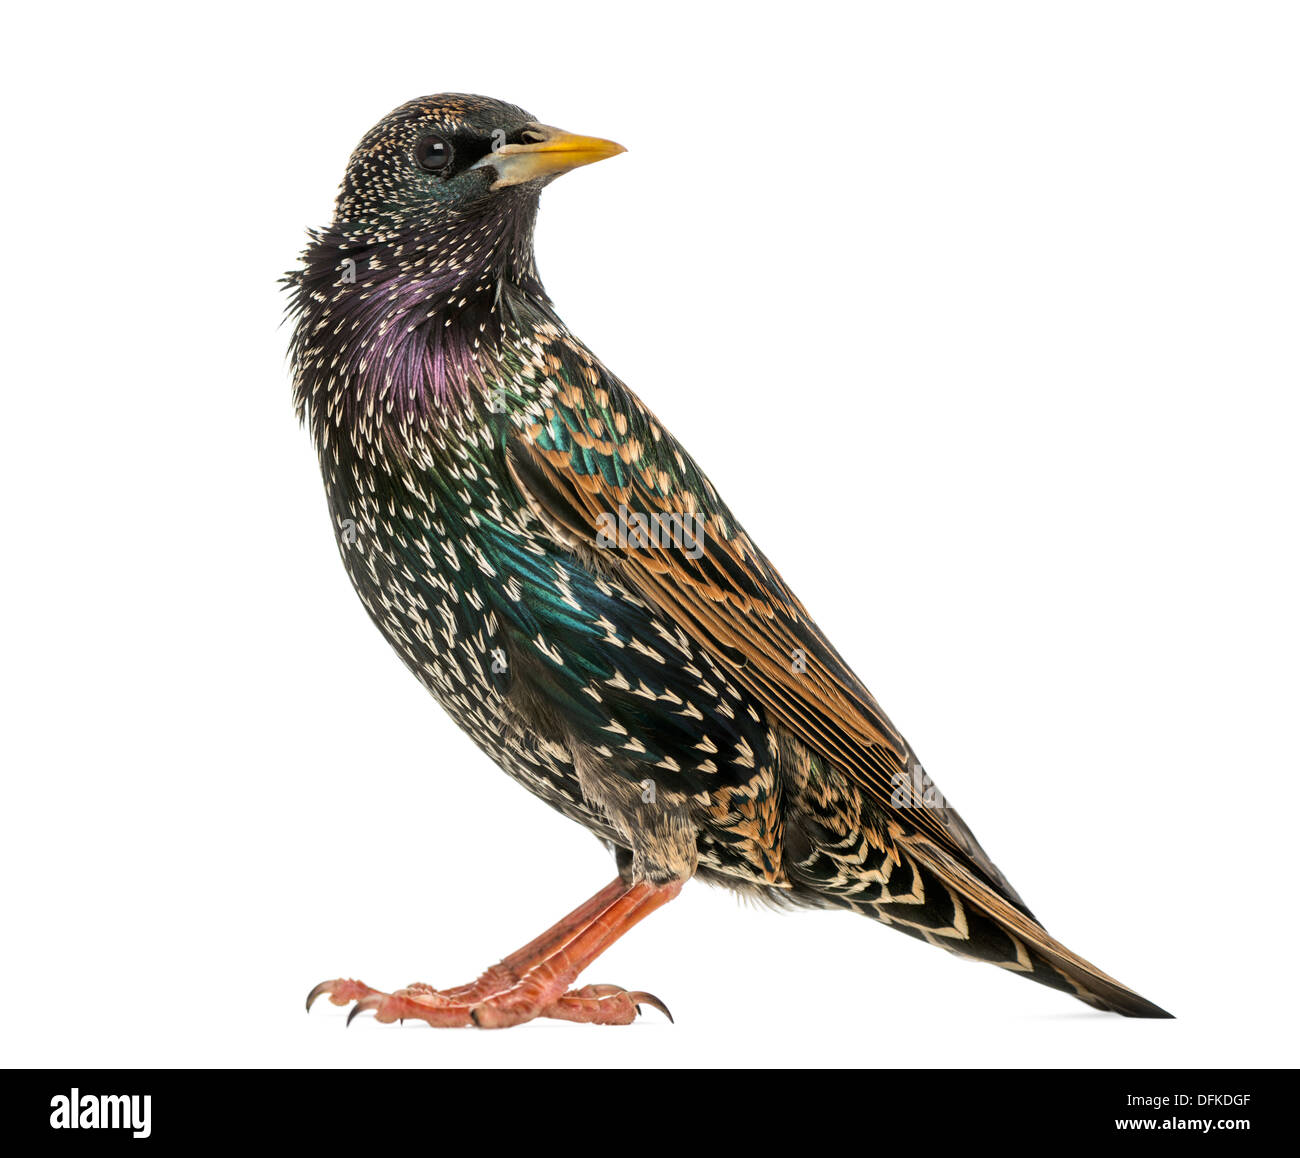 Side view of a Common Starling, Sturnus vulgaris, against white background Stock Photo